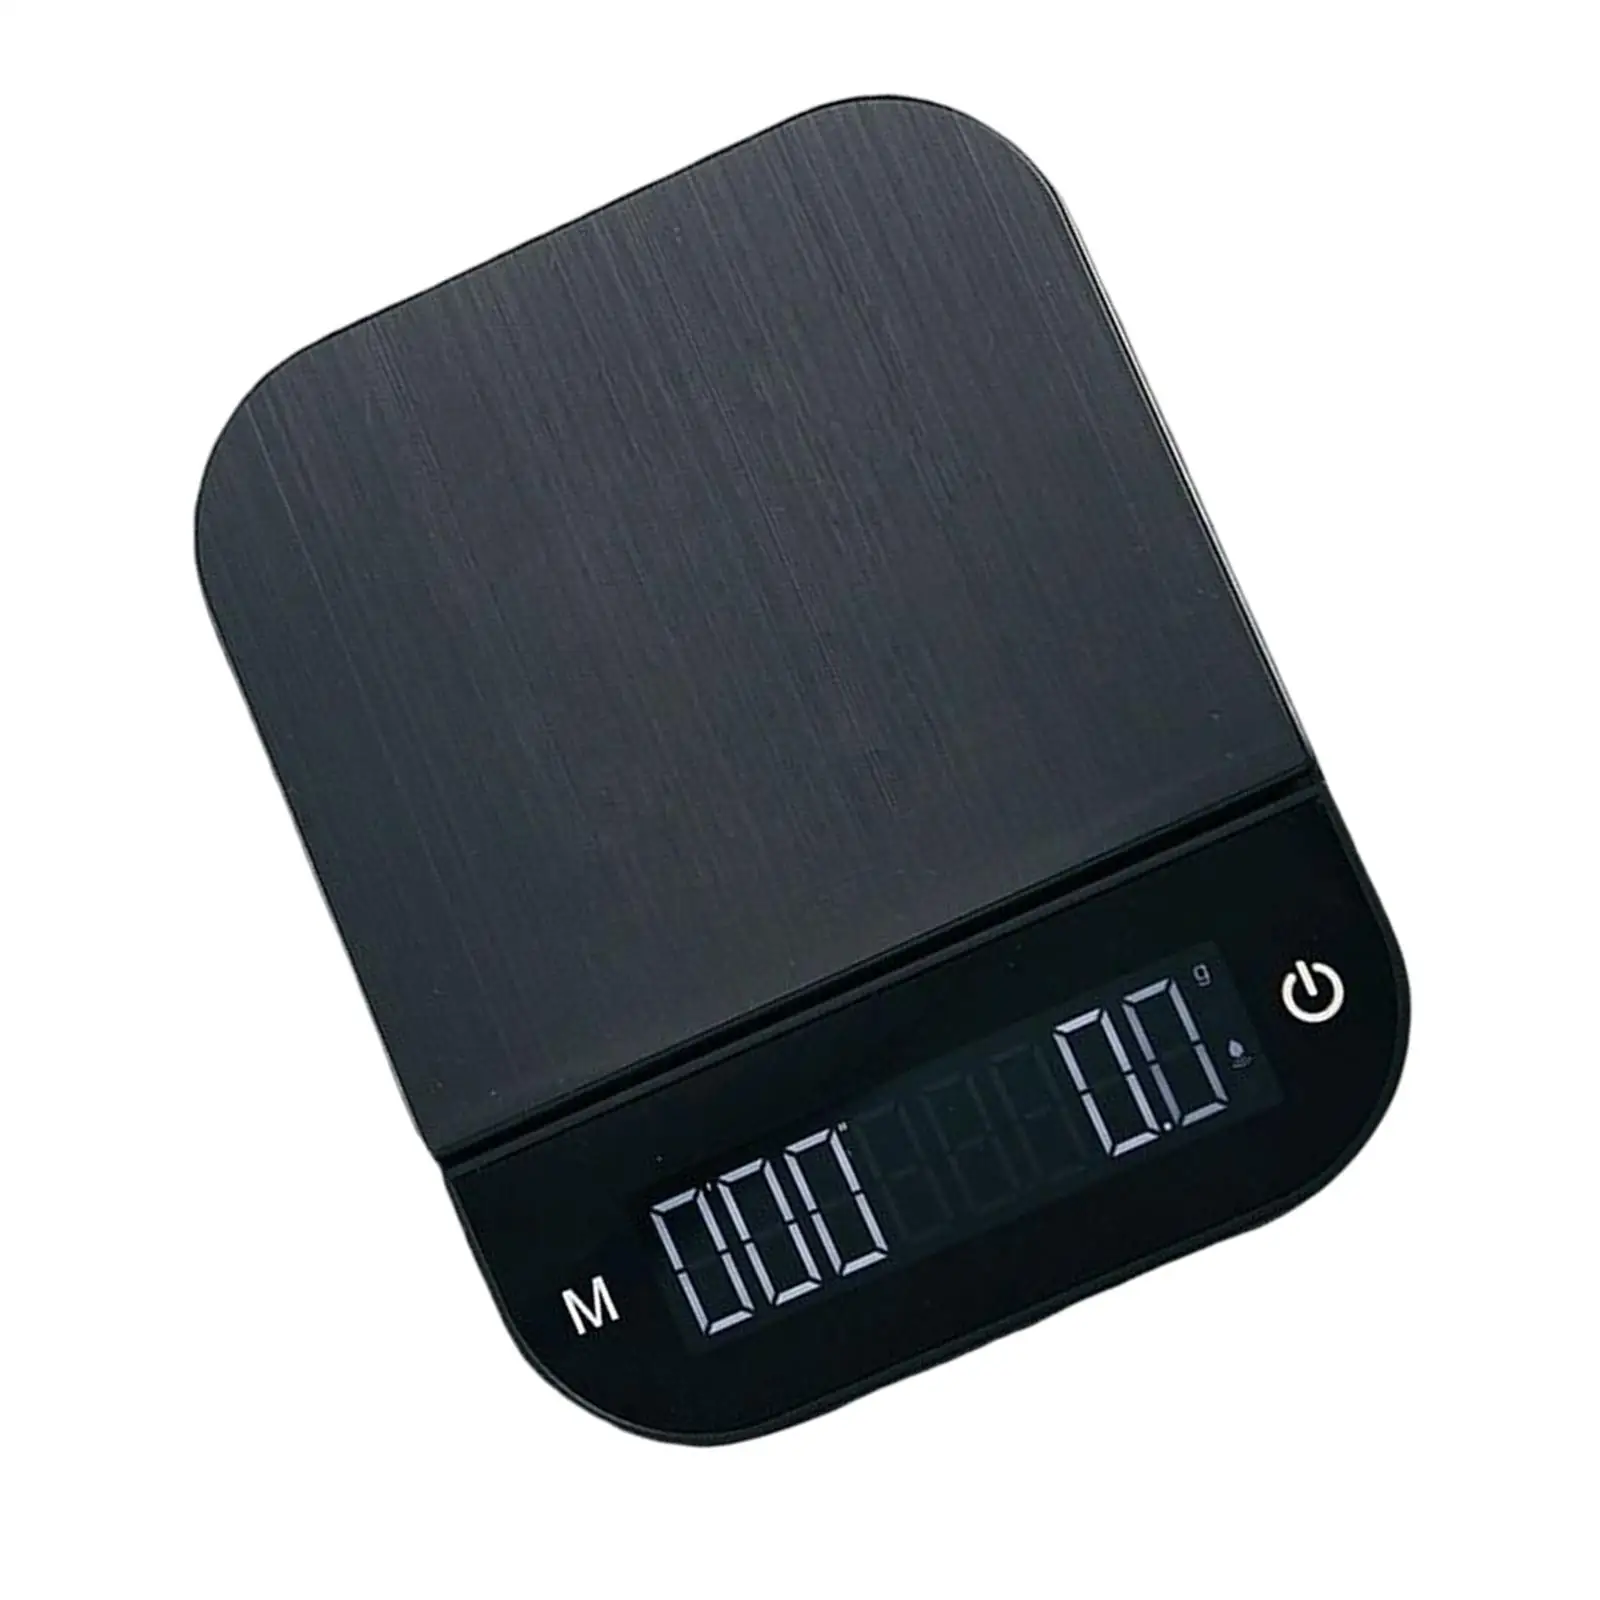 Pocket Scale Portable Electronic Precision Stainless Steel High Precision Digital Scale Electronic, for Household Laboratories